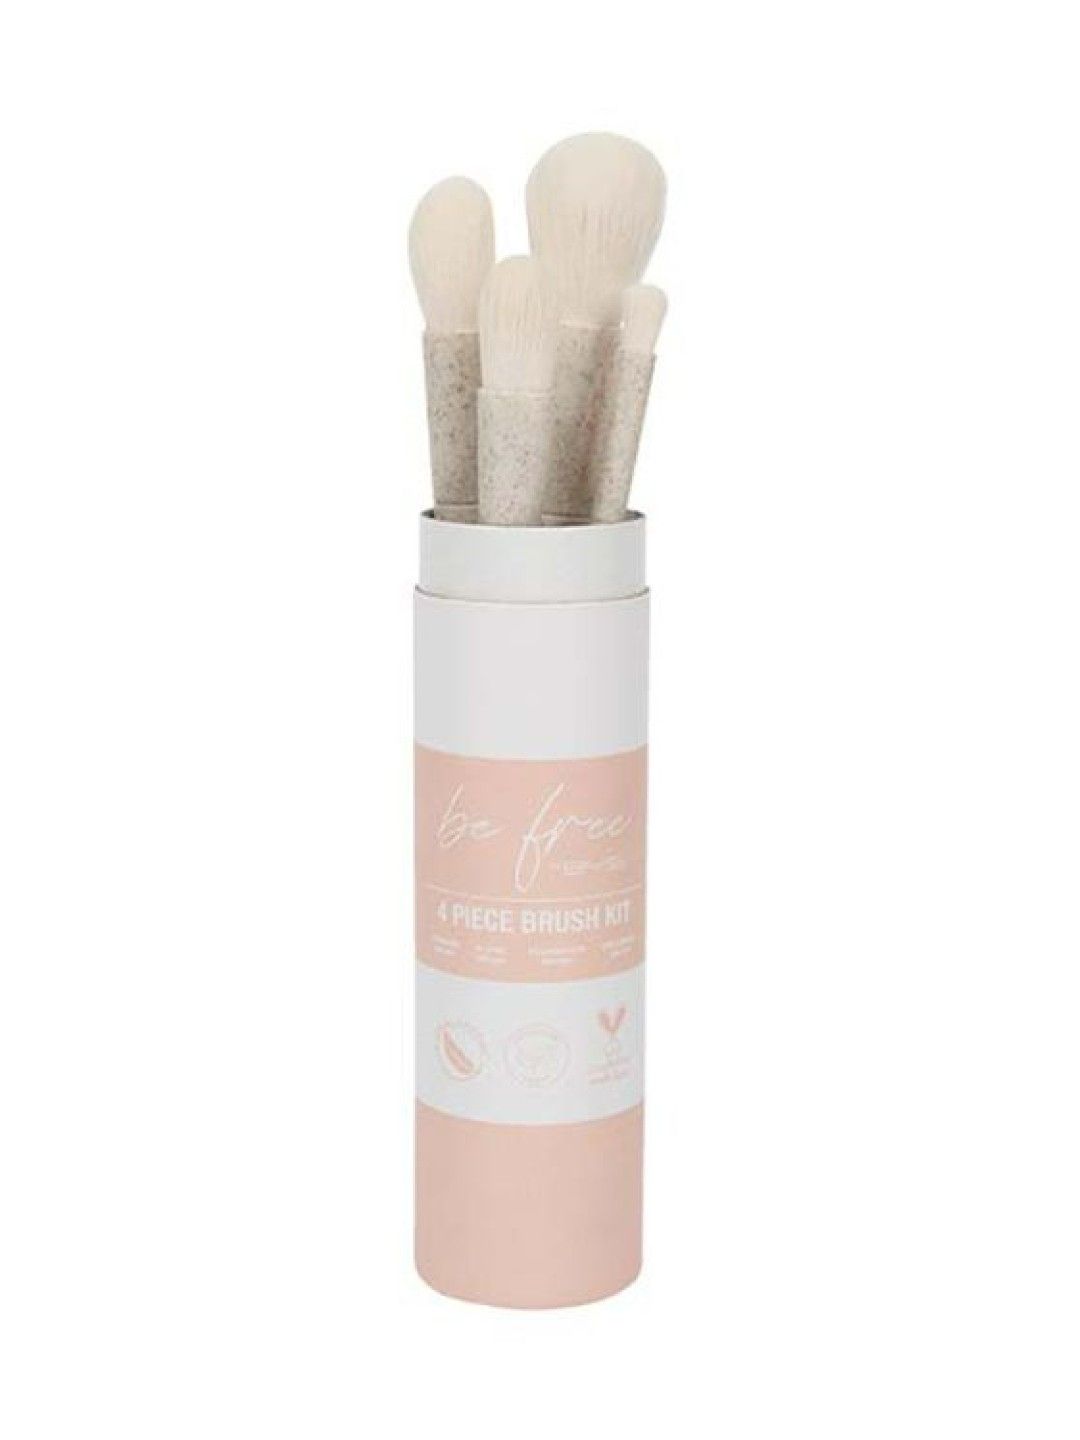 BYS Be Free 4 Piece Brush Kit (No Color- Image 2)